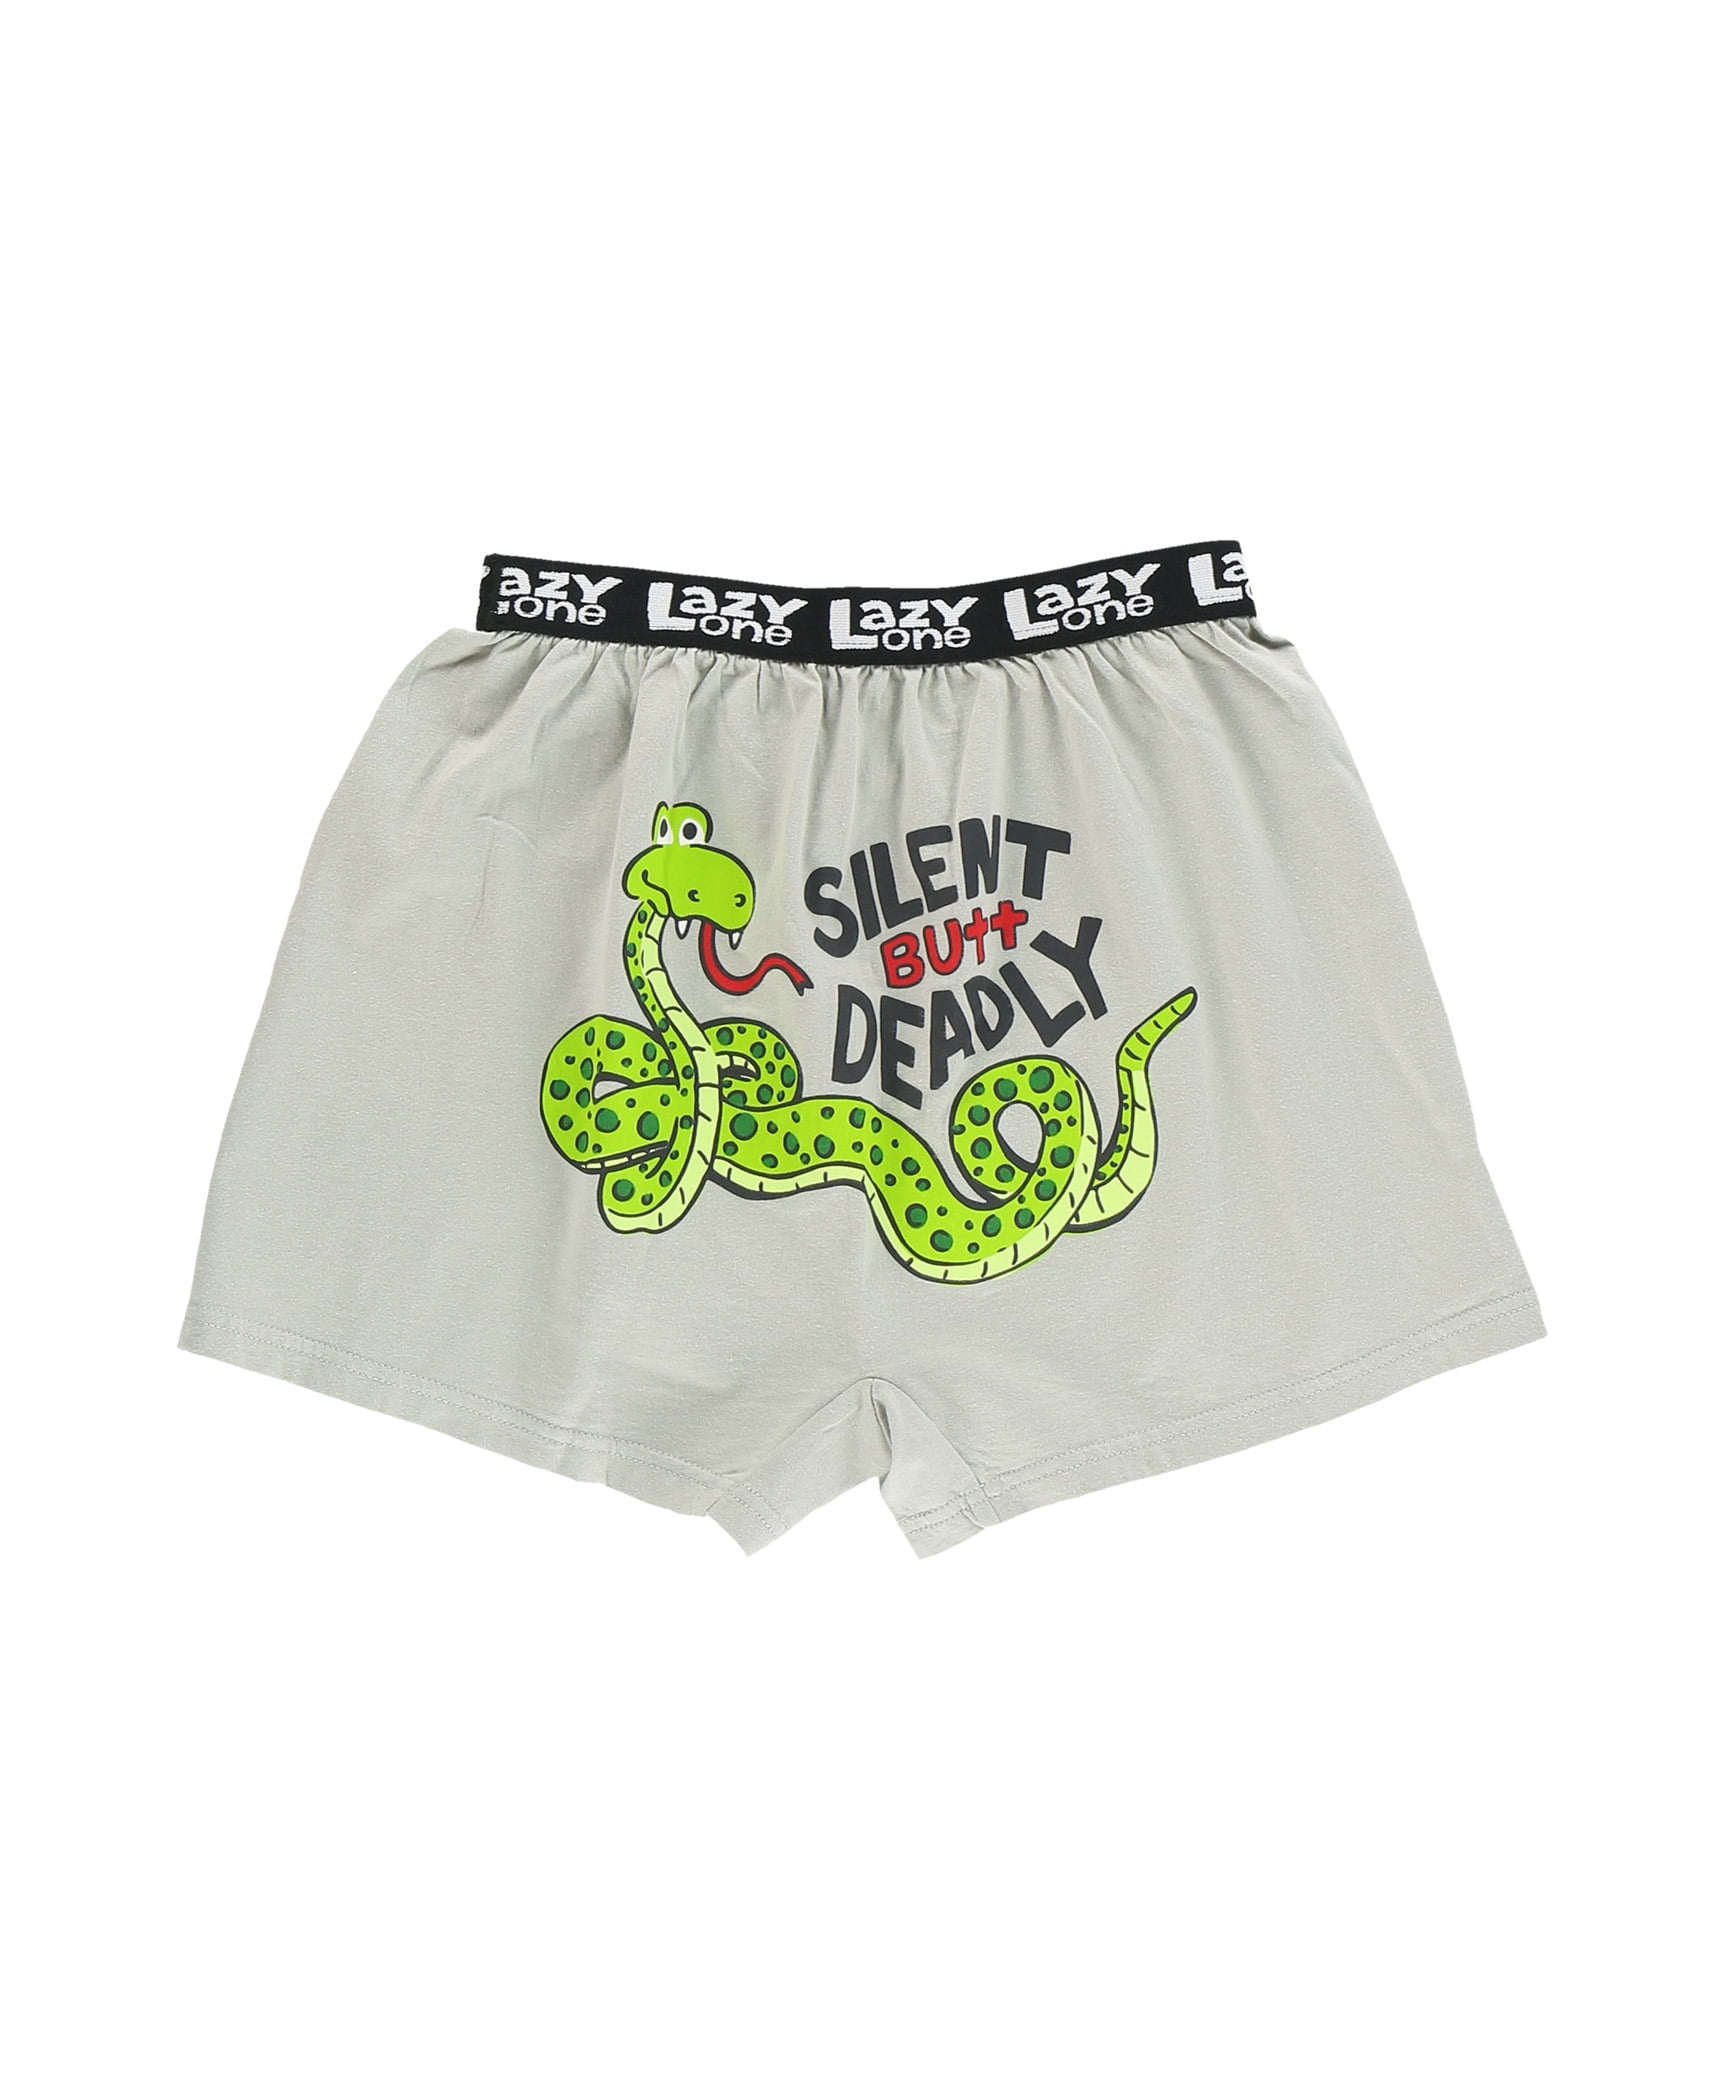 LazyOne Funny Animal Boxers, Novelty Boxer Shorts, Humorous Kids'  Underwear, Gag Gifts for Boys, Snake (Silent Butt Deadly, Large) 